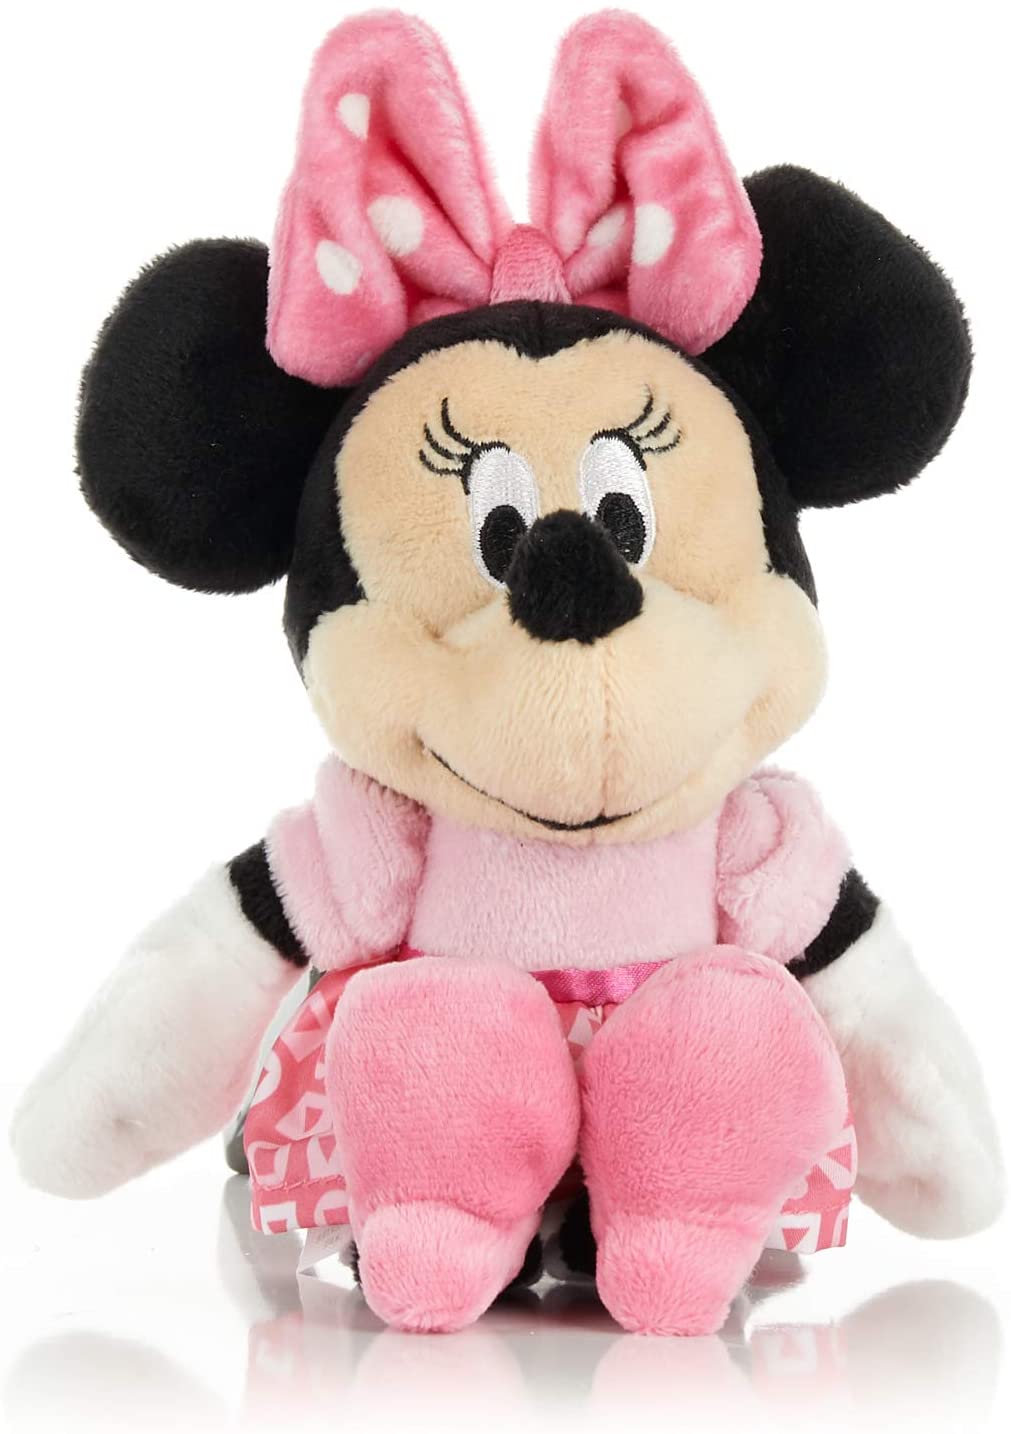 mickey and minnie mouse stuffed animals